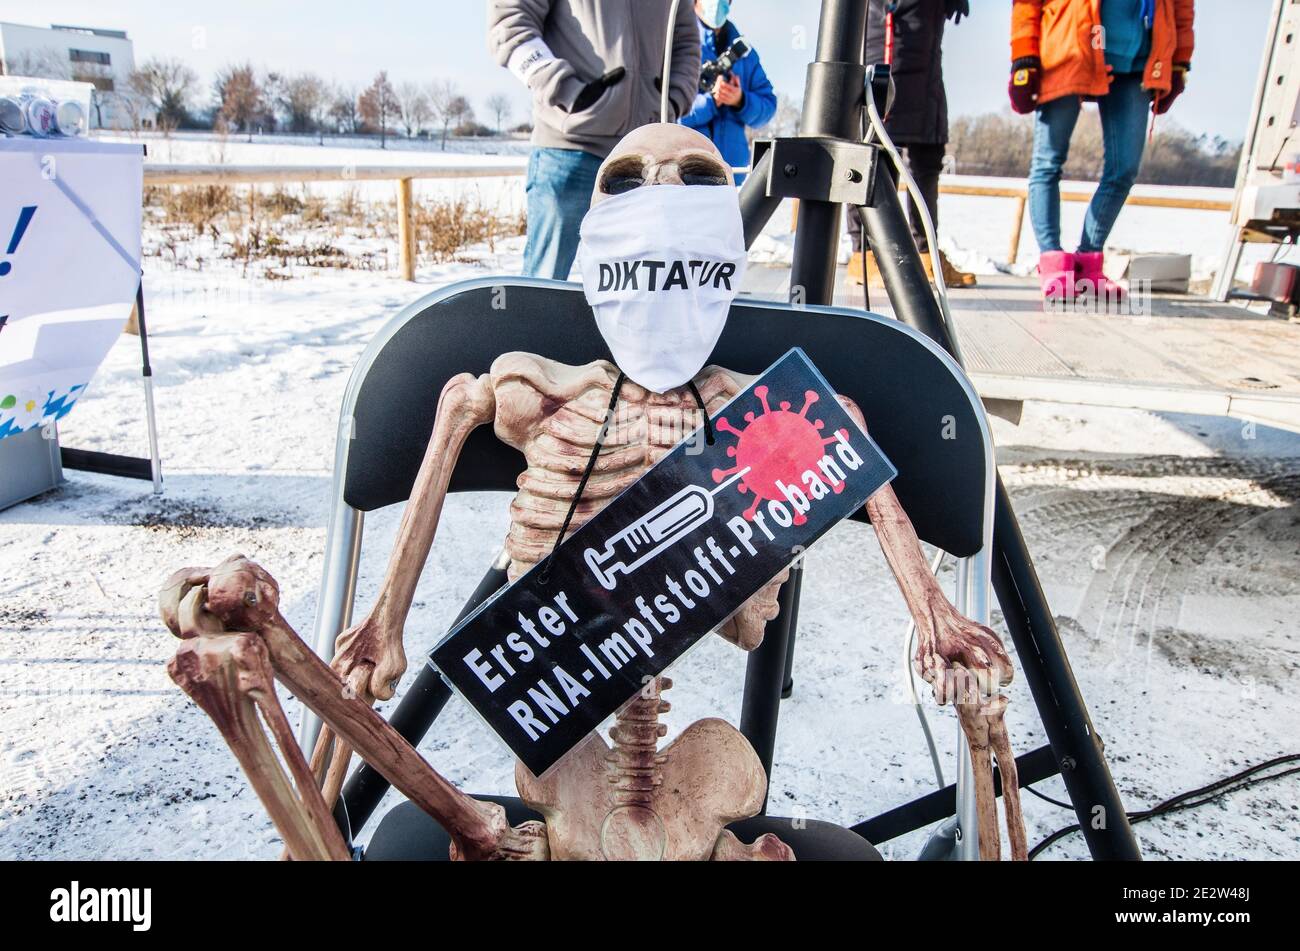 Fuerstenfeldbruck, Bavaria, Germany. 15th Jan, 2021. The so-called Corona rebels in Bavaria use a skeleton with the words ''Diktatur'' (dictatorship) and ''first test subject'' to mock the mRNA vaccine. Organized by the Querdenken/Corona Rebel participating 'Polizeifuer Aufklaerung'' group (Police for Education), a demonstration was held at theoffices of the Fuerstenfeldbruck Criminal Police Unit (Kriminalpolizei, KriPo).Â The FFB KriPo raided the offices of prominenthomeopath doctor Rolf Kron in Kaufering who is alleged to have been producingfake medical certificates for Coronaanti-mas Stock Photo